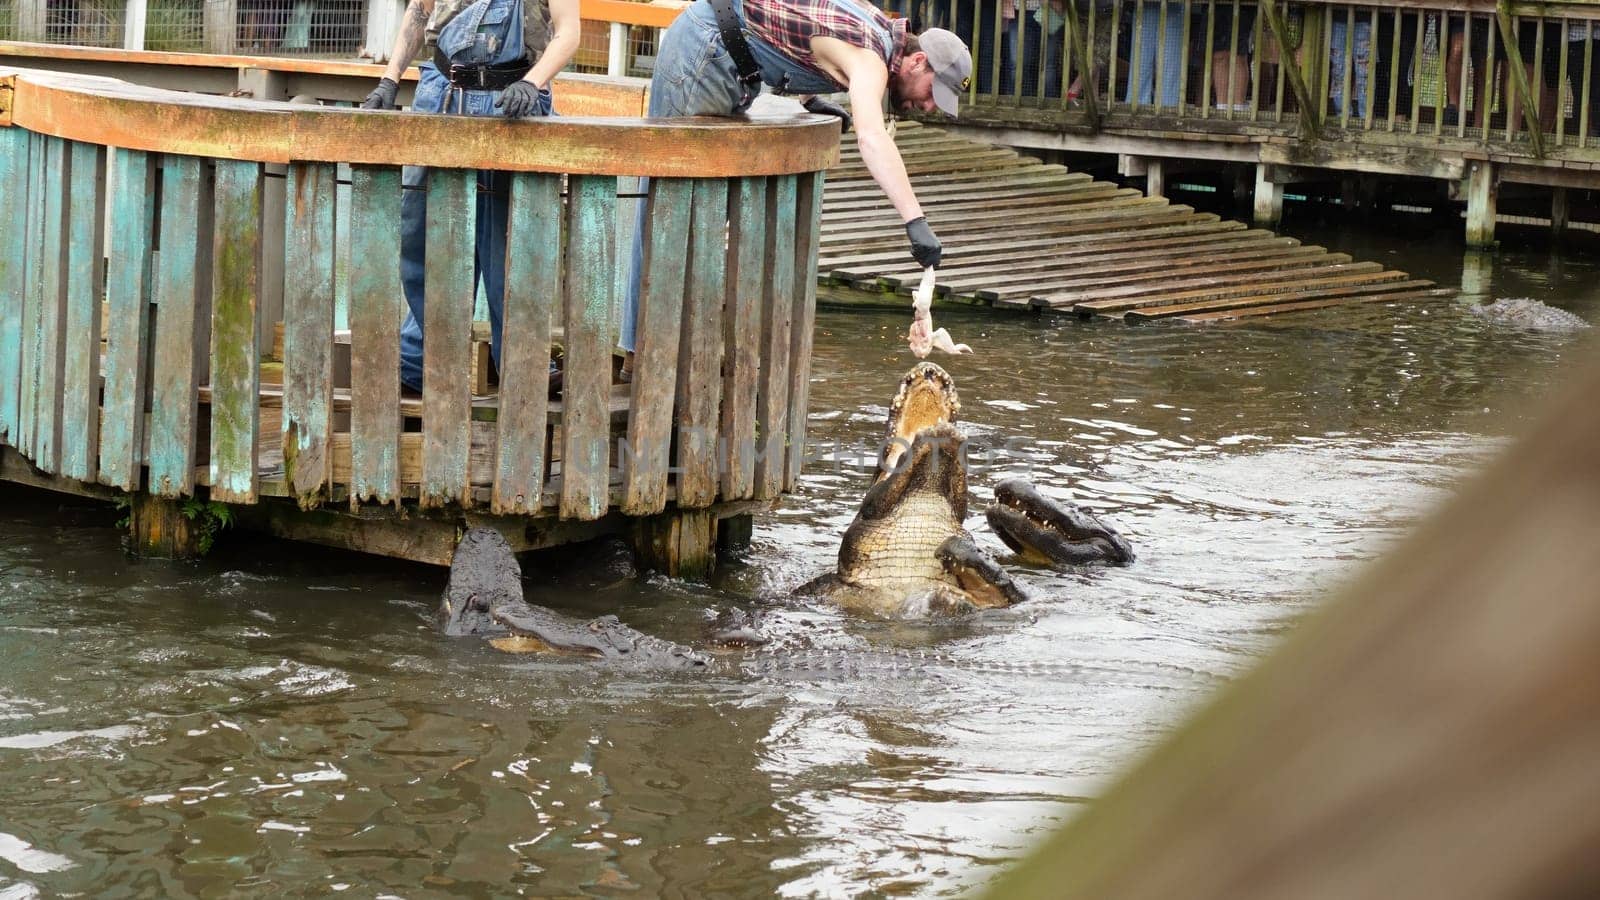 An alligator snapping its jaws while being fed a piece of meat by a gloved zookeeper at a wildlife park in Florida. More alligators swim around in the murky water below the wooden walkway.